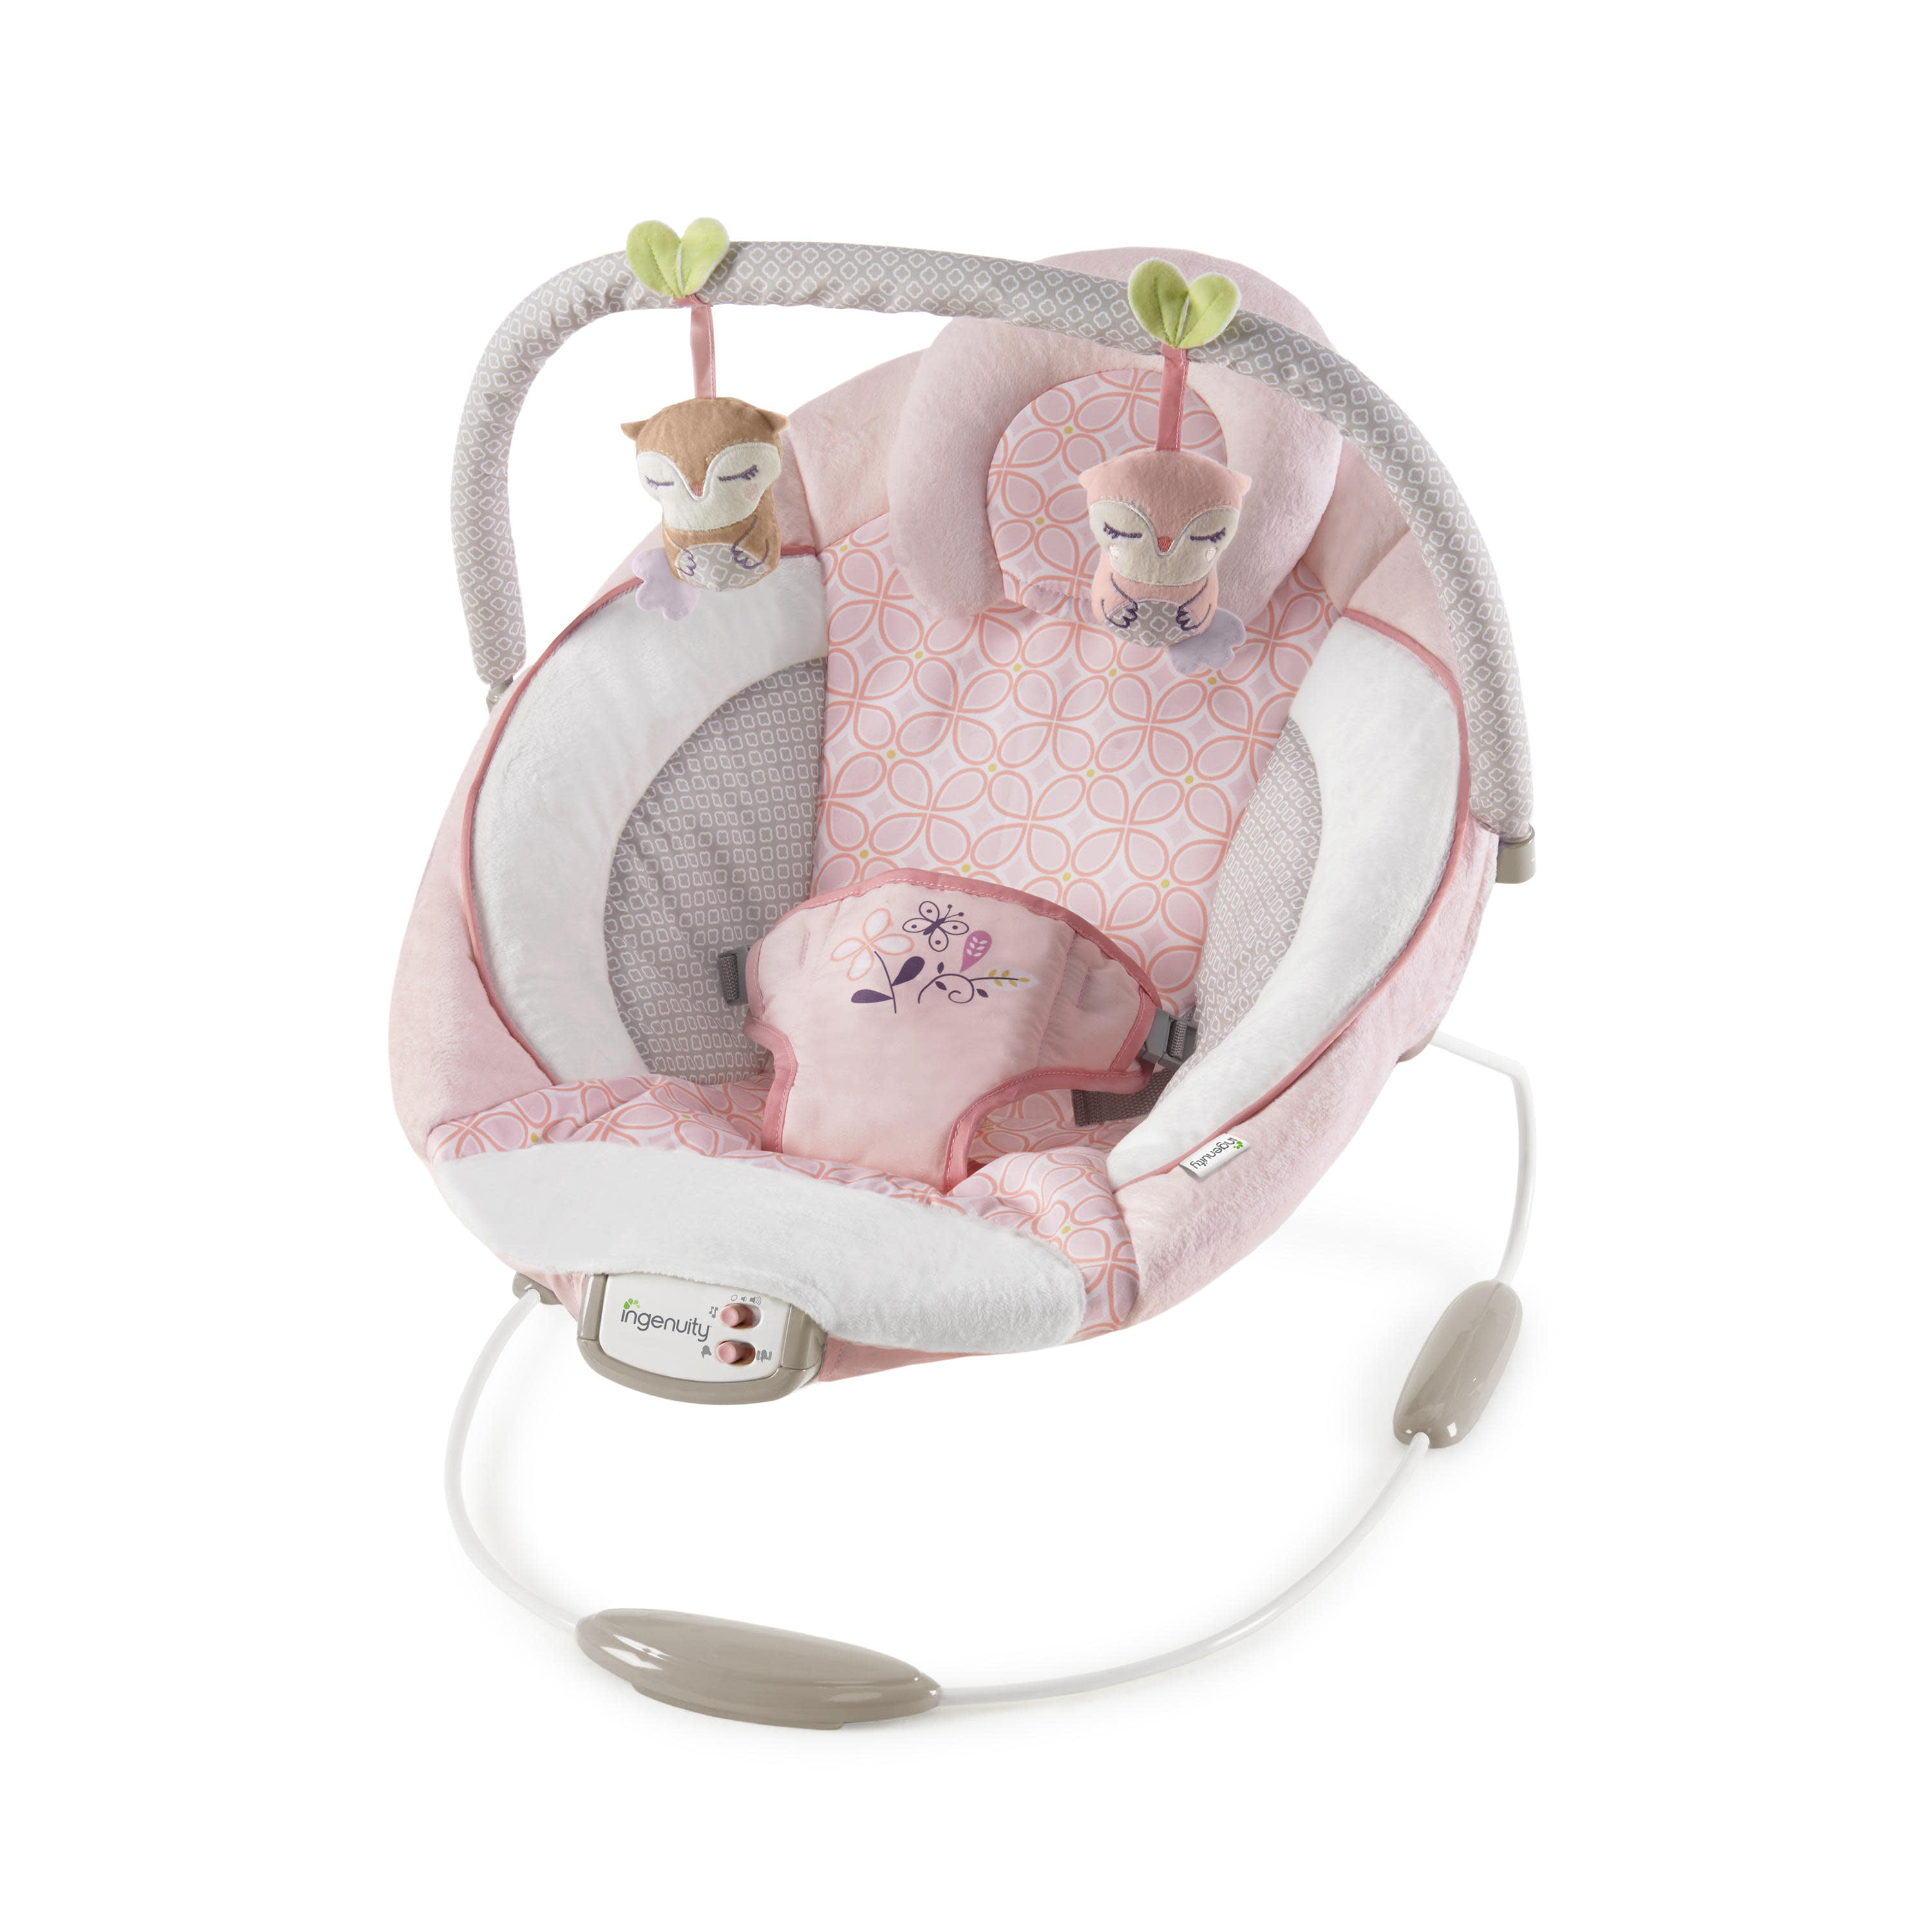 pink baby bouncer